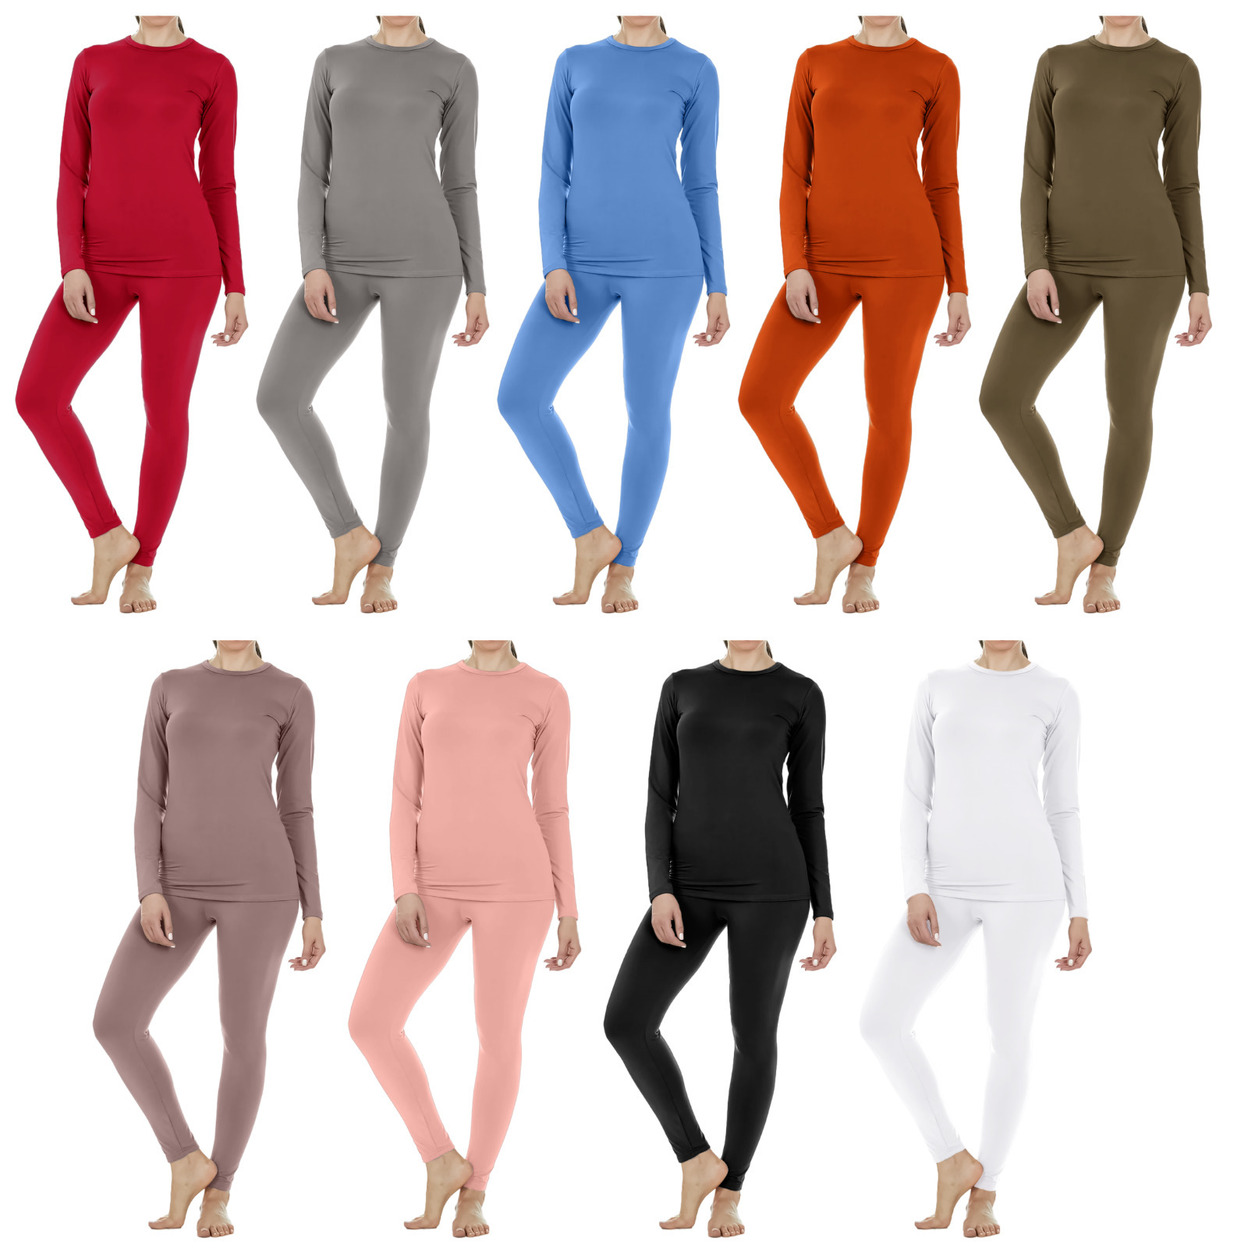 3-Sets: Women's Fleece Lined Winter Warm Soft Thermal Sets For Cold Weather - Medium